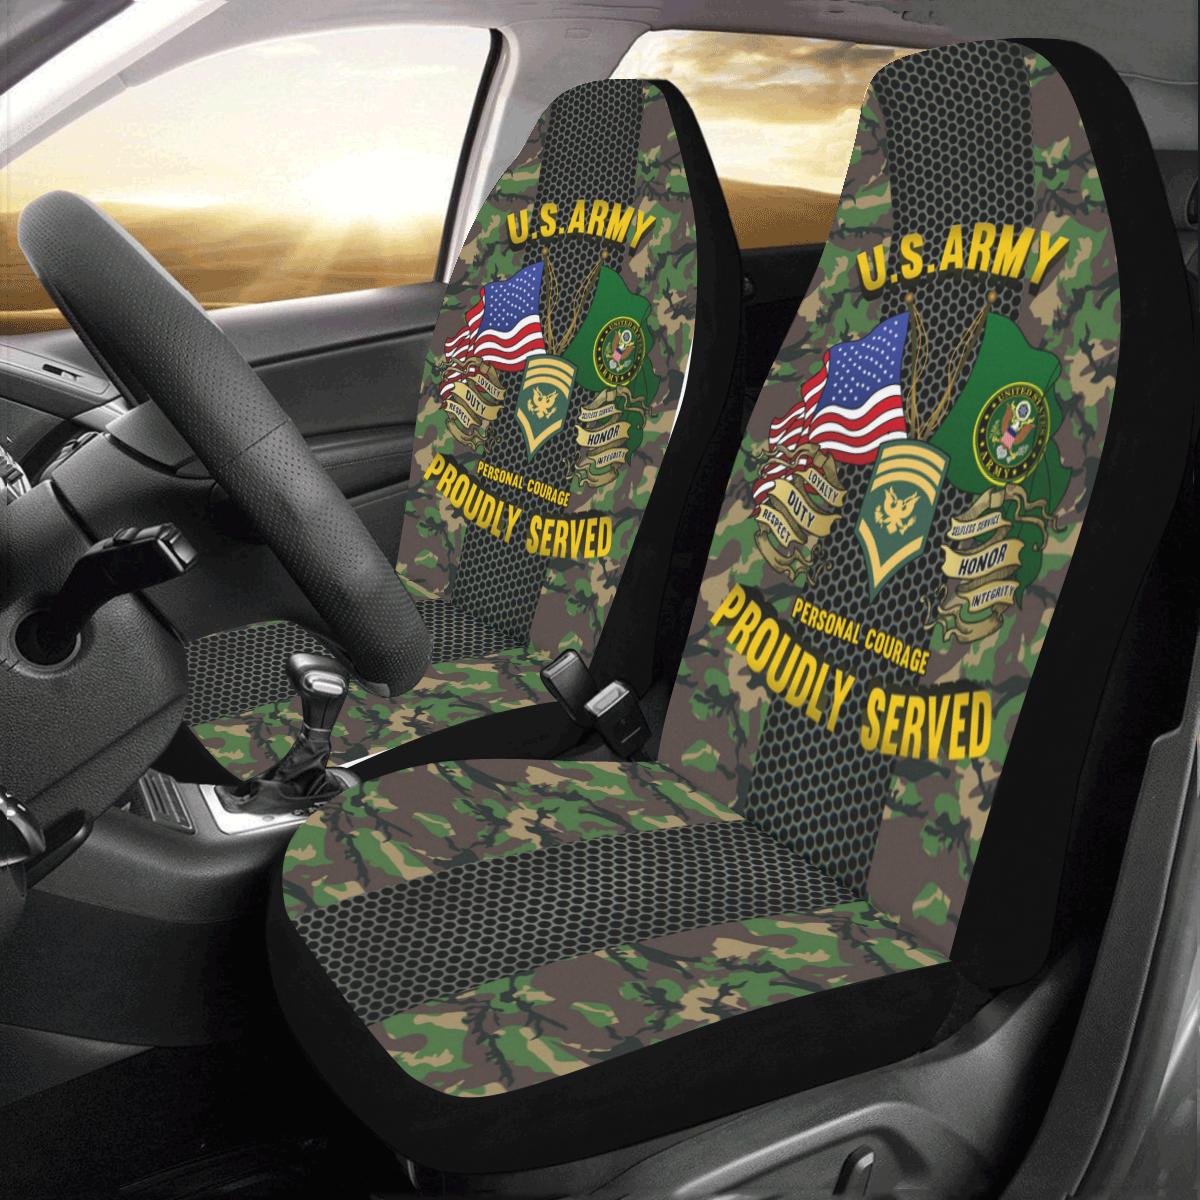 US Army E-8 SPC E8 SP8 Specialist 8 - Car Seat Cov Car Seat Covers (Set of 2)-SeatCovers-Army-Ranks-Veterans Nation